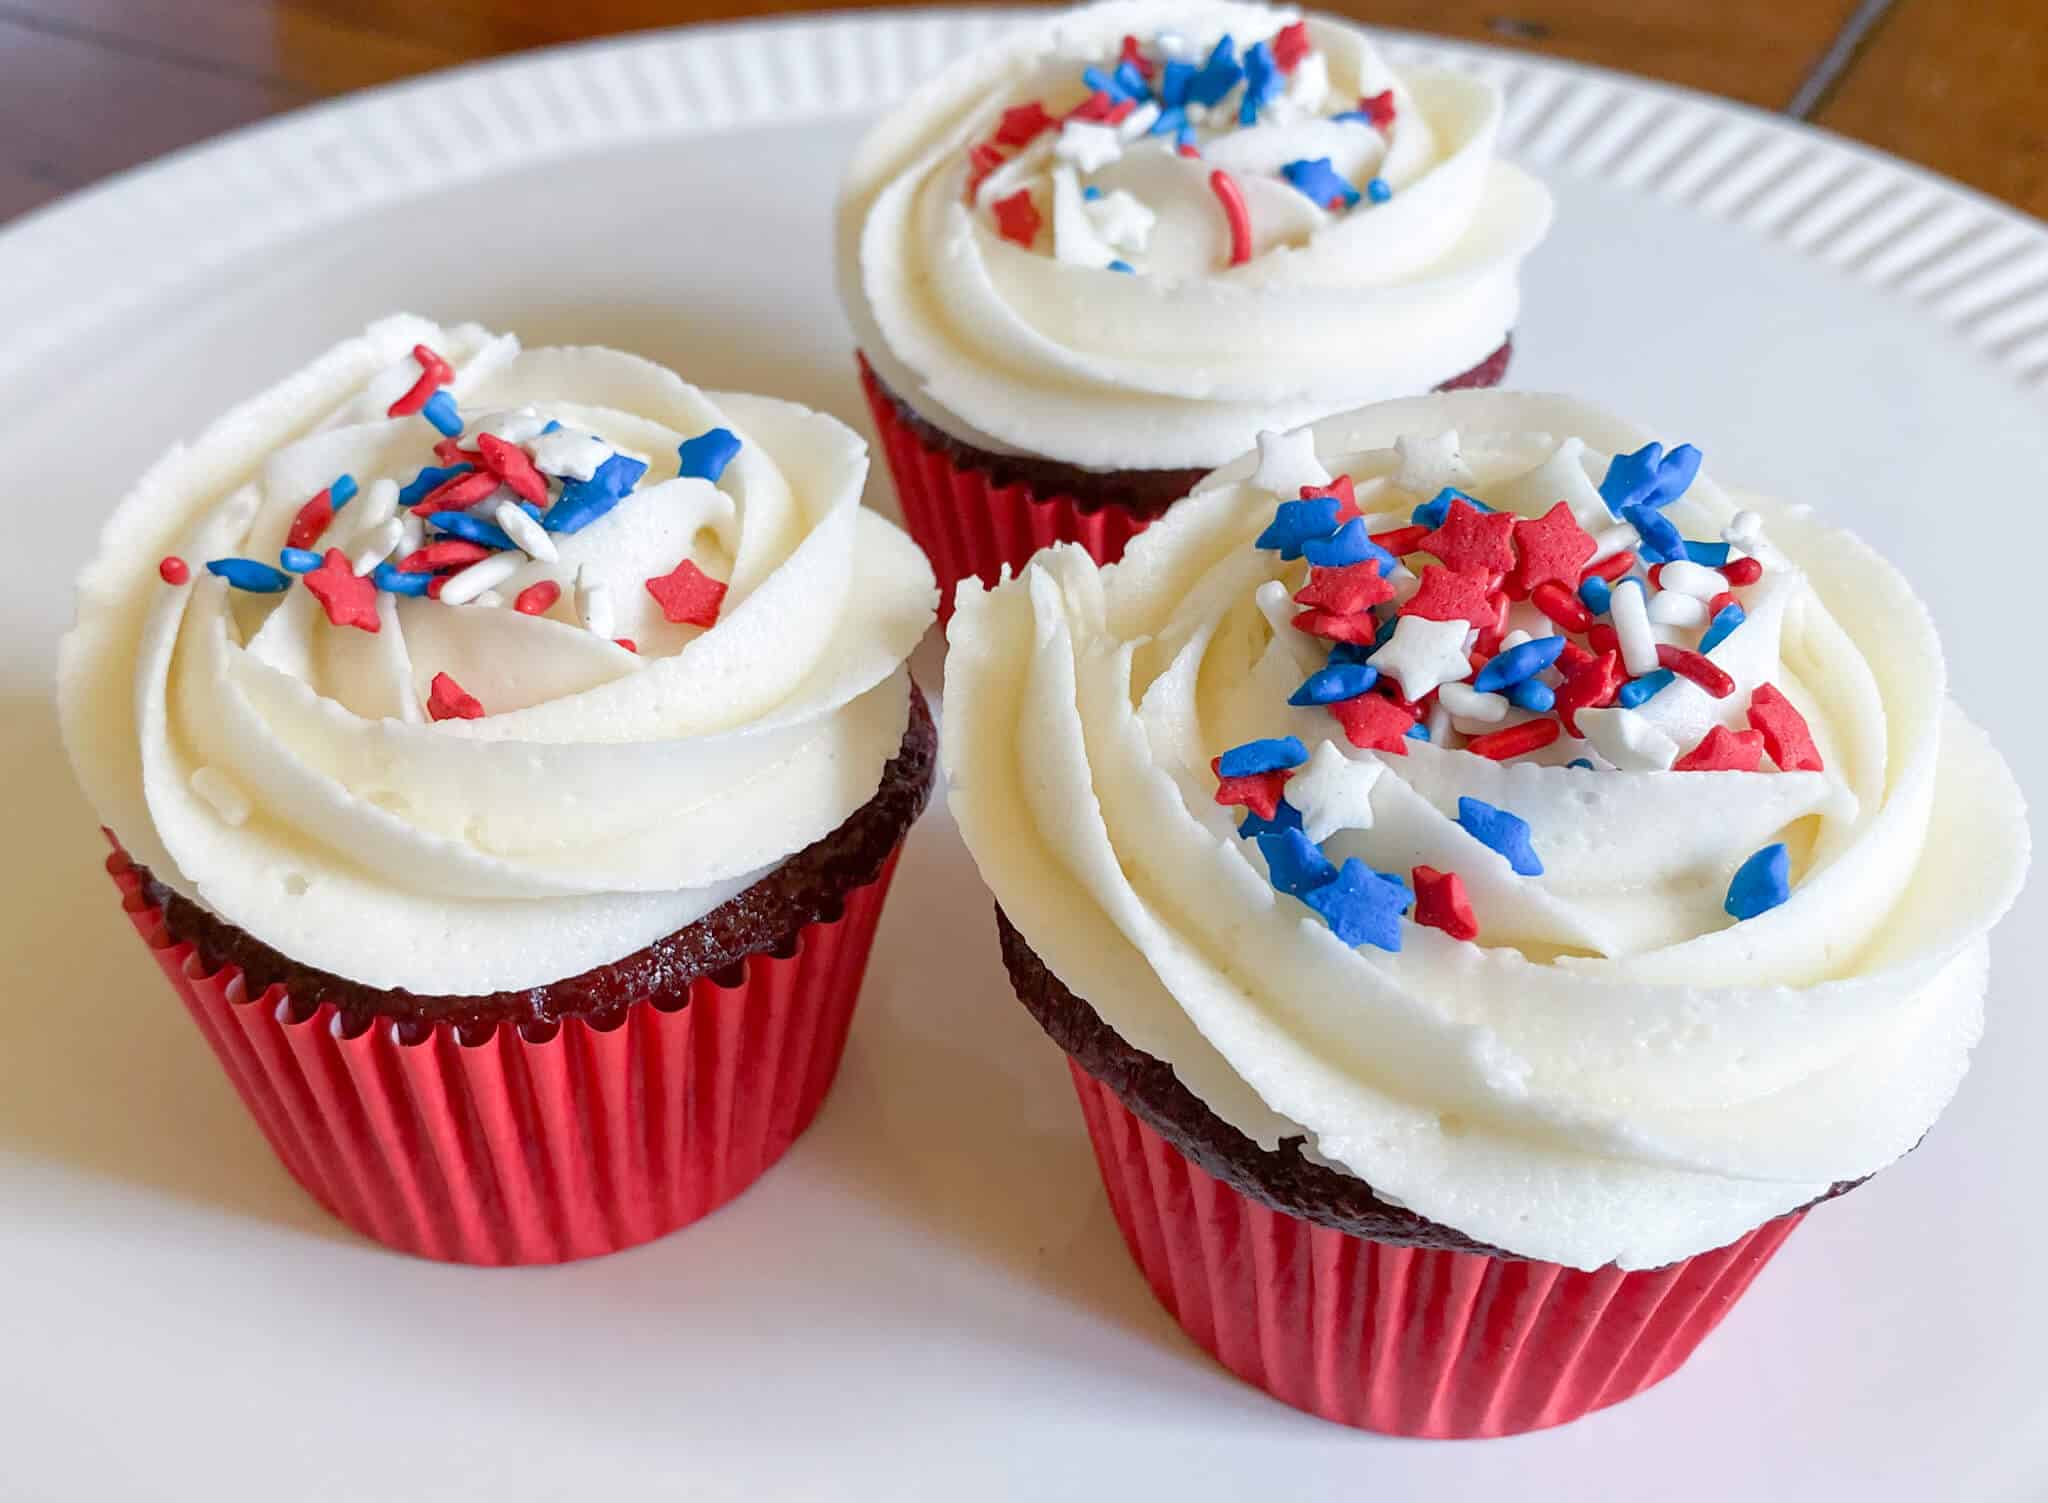 Printable Election Day Cupcake Toppers for a Bake Sale - Teacher Baker Maker